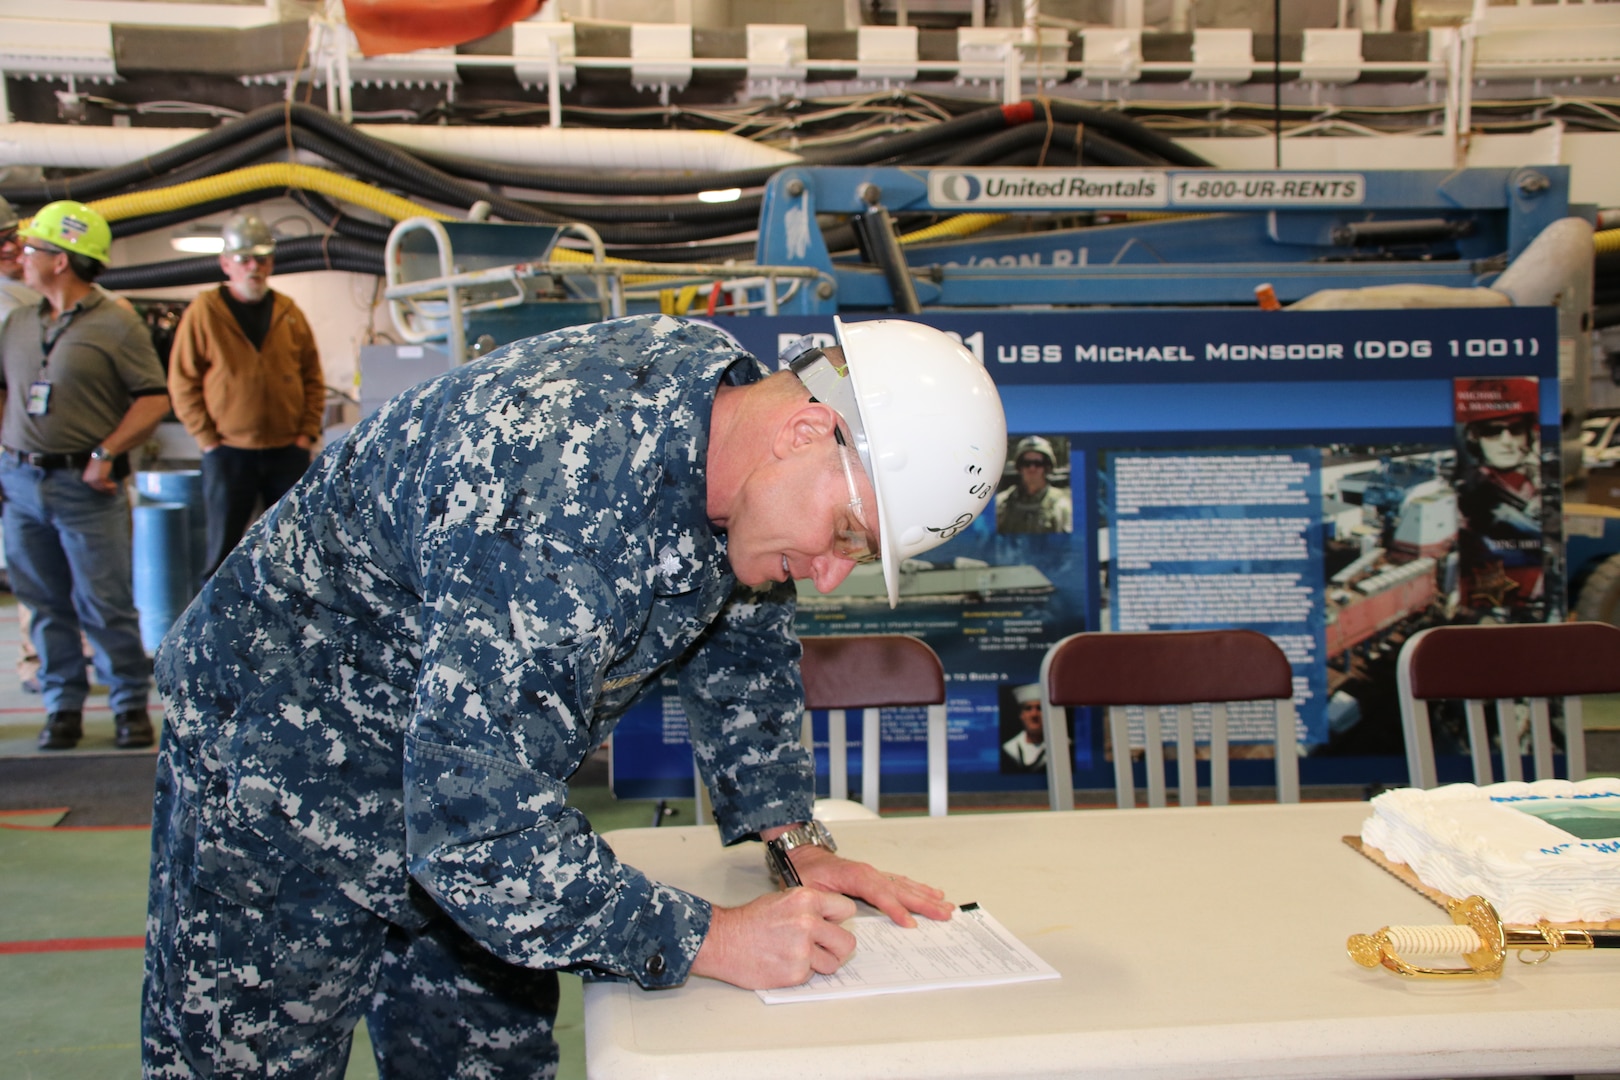 Cmdr. John Bauer, DDG 1000 program manager's representative, signs paperwork accepting delivery of the future USS Michael Monsoor (DDG 1001).  Following a crew certification period, Michael Monsoor will transit to its homeport in San Diego, California, for commissioning in January 2019.